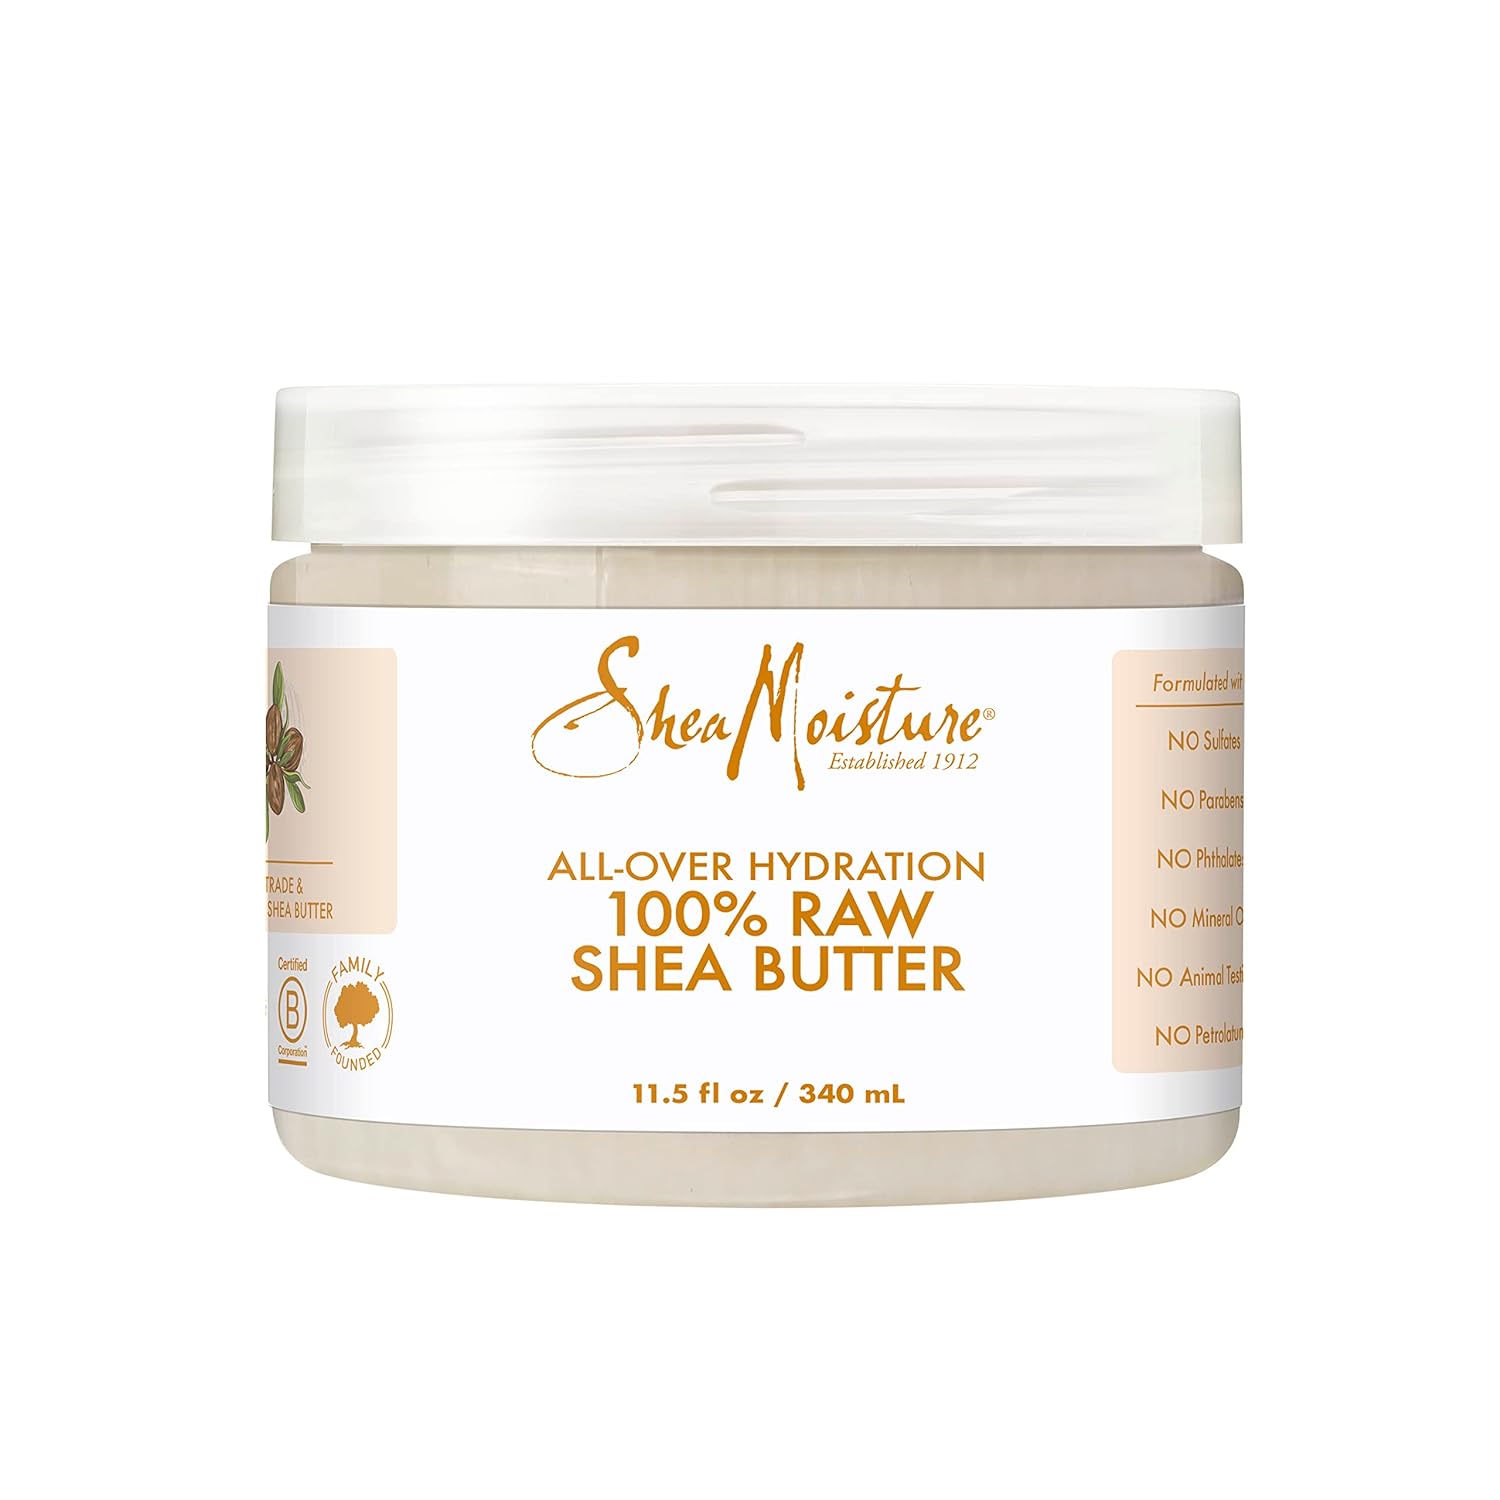 Shop the 10 Best Hydrating Body Butters for All Skin Types & Budgets